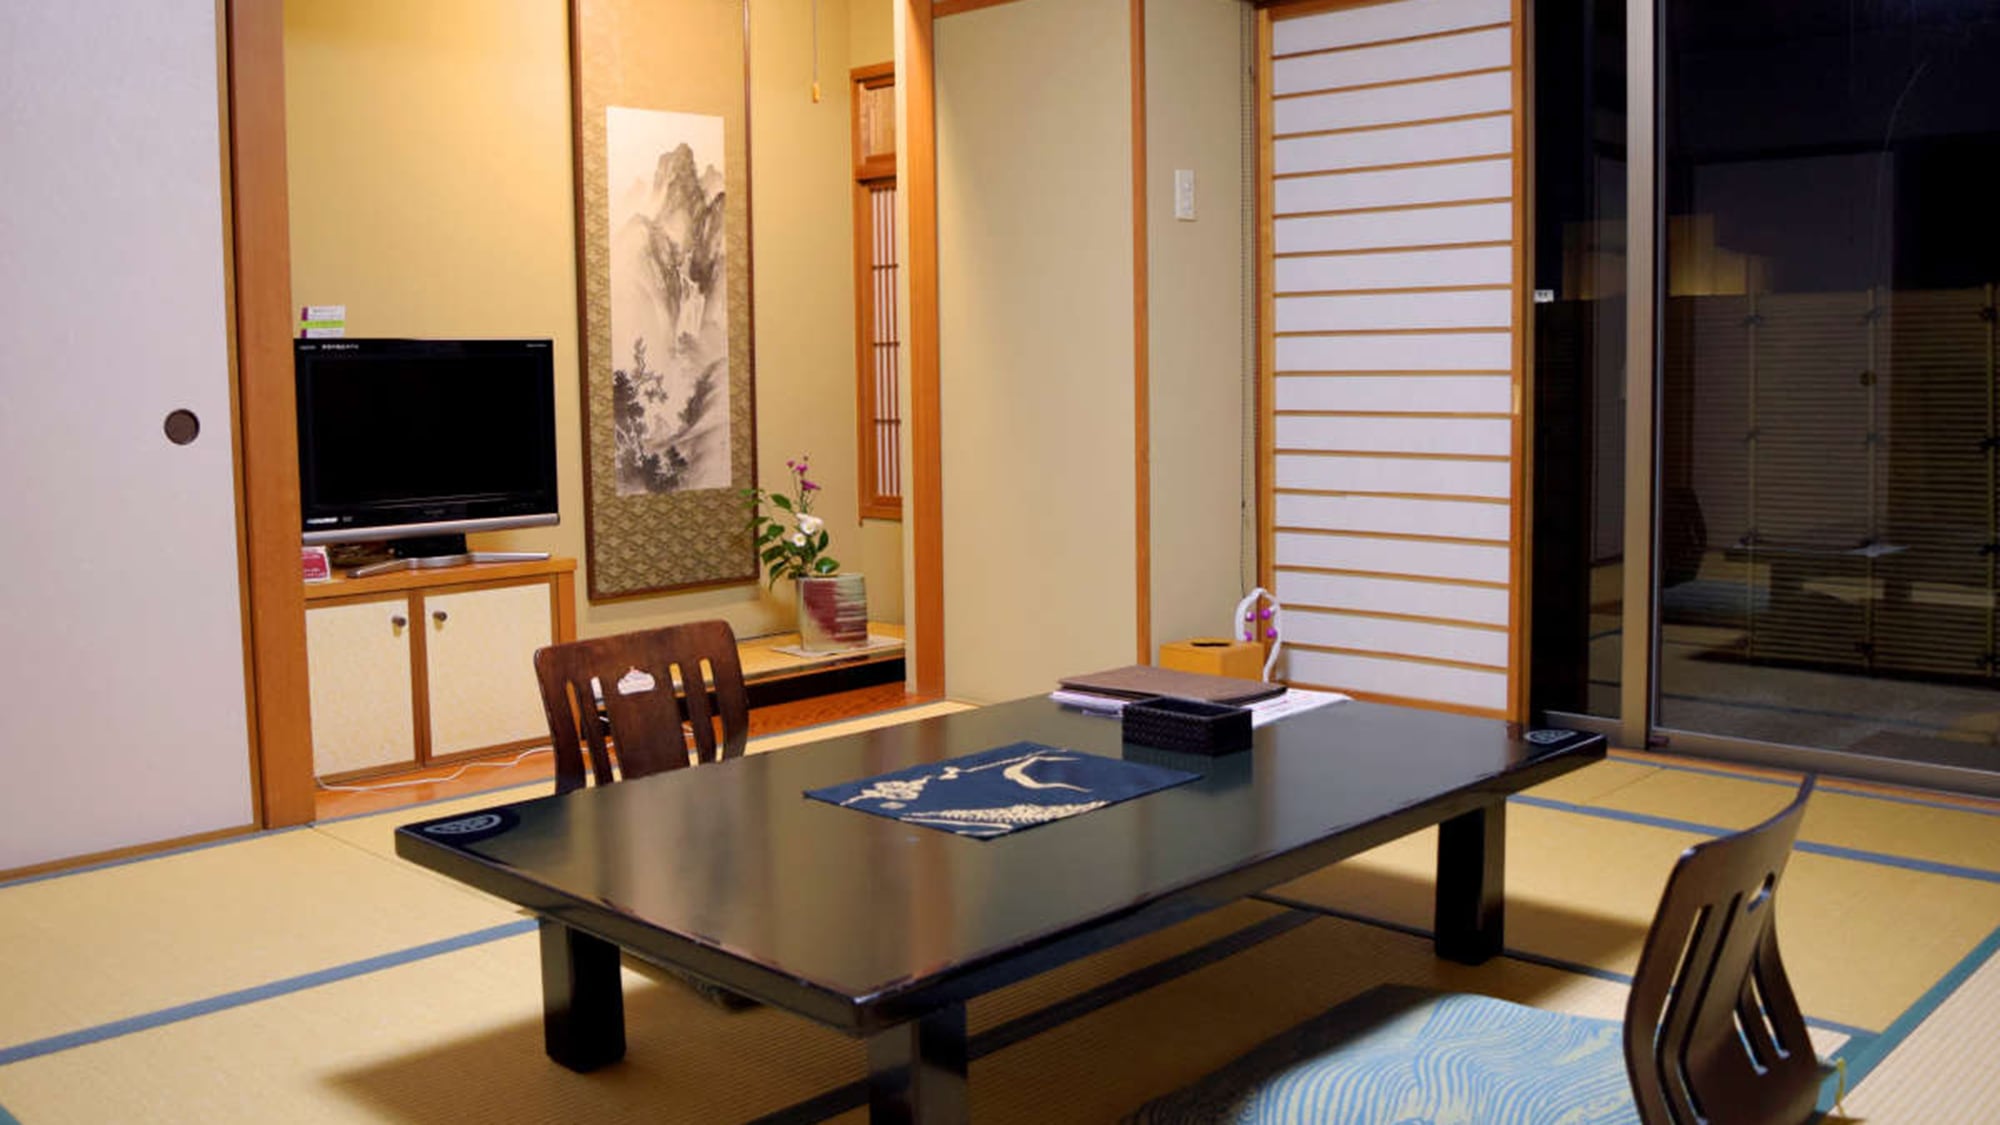 Town side Japanese-style room 8 tatami mats